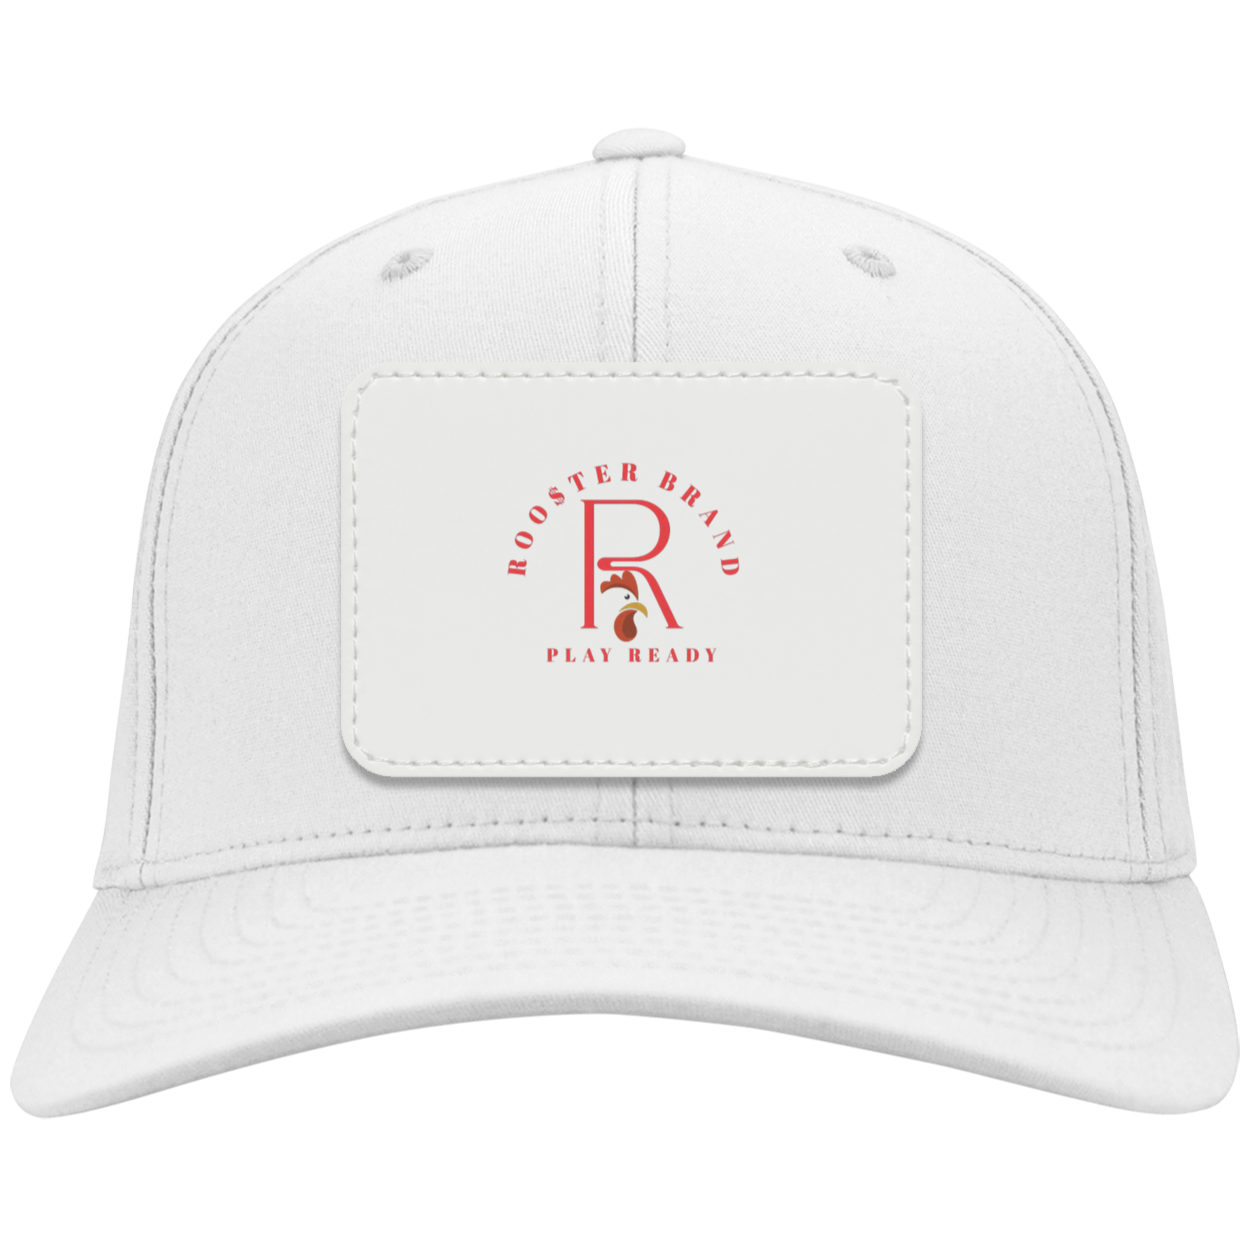 Roo$ter Brand Twill Cap - Patch